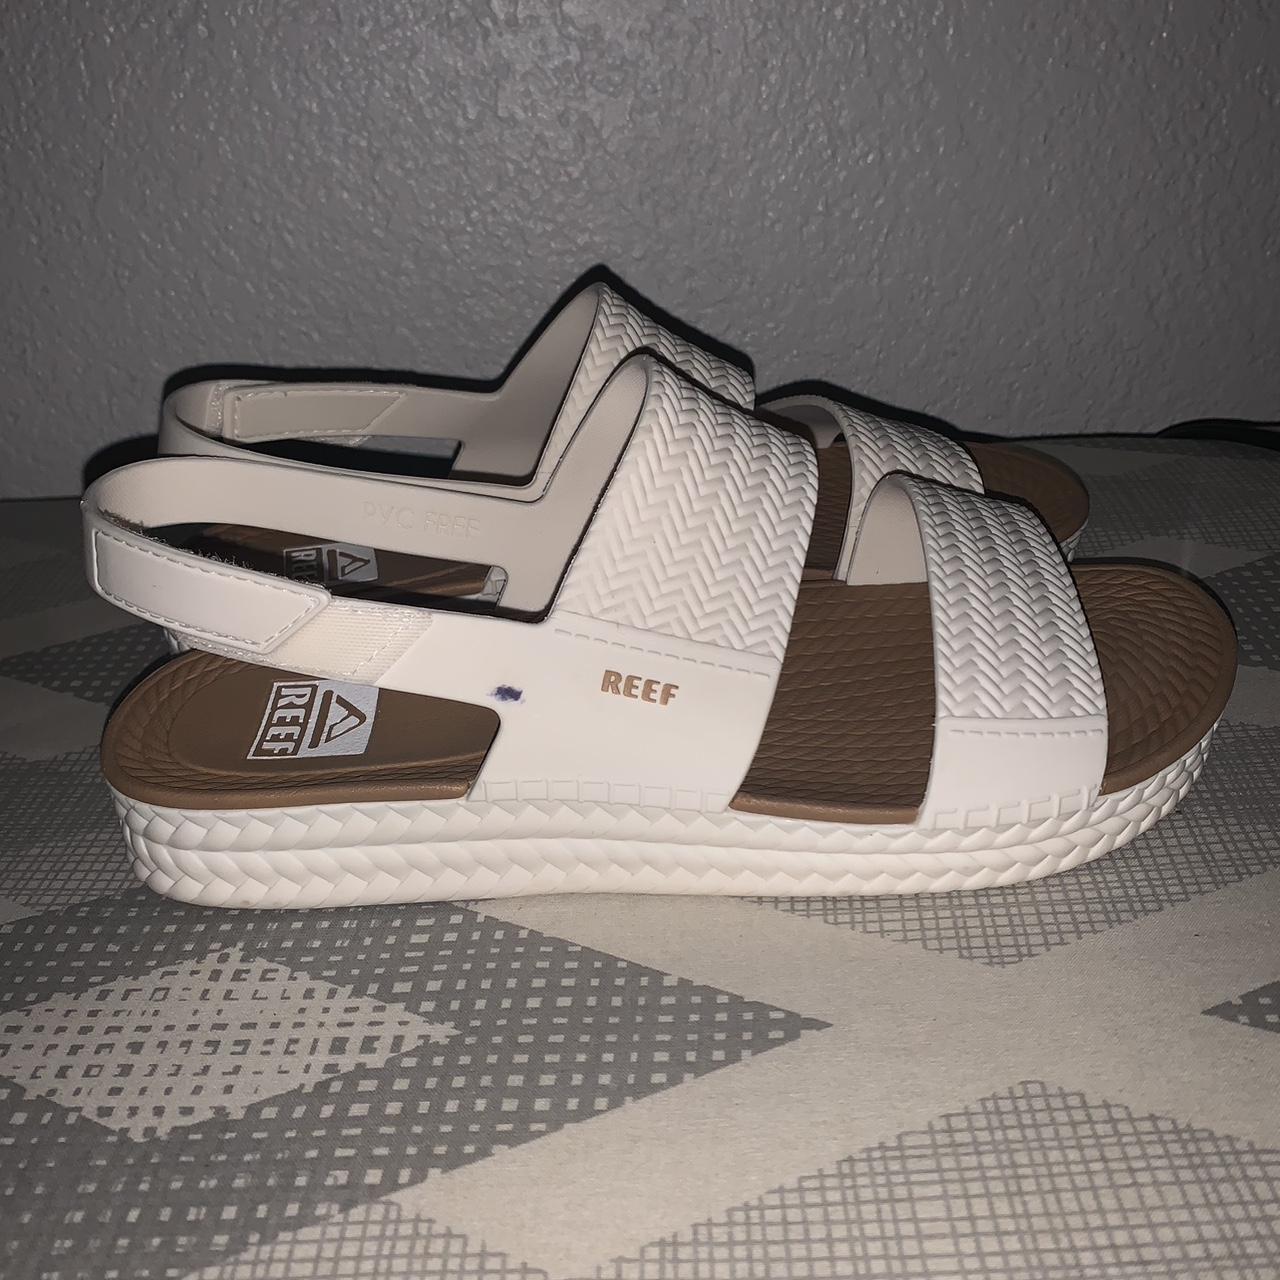 Reef Women's White and Tan Sandals | Depop